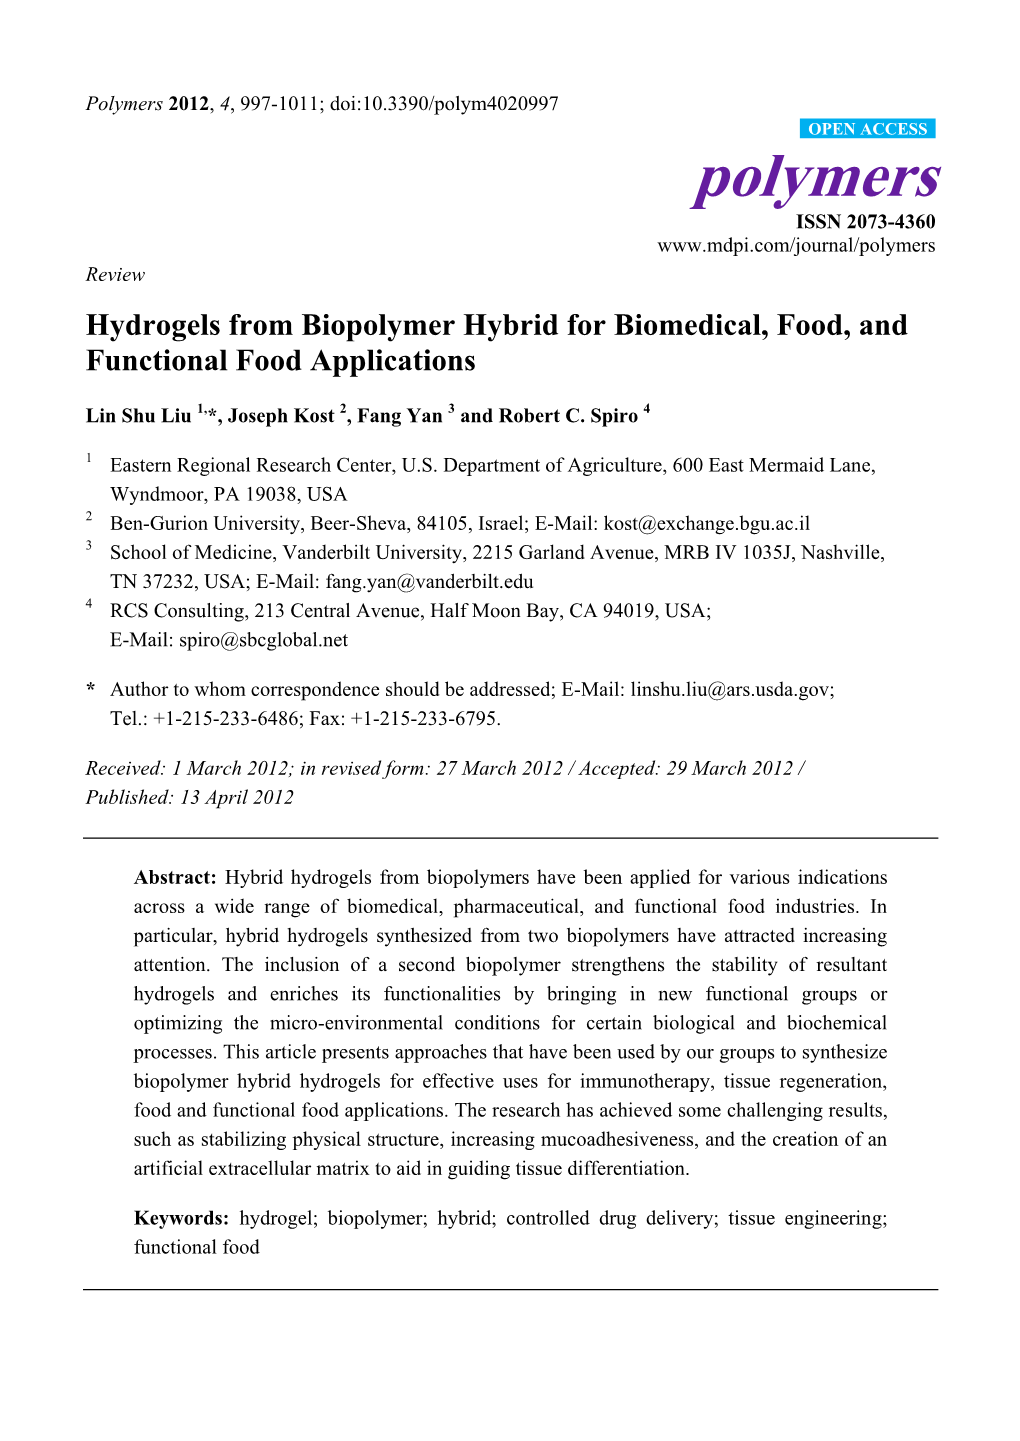 Hydrogels from Biopolymer Hybrid for Biomedical, Food, and Functional Food Applications